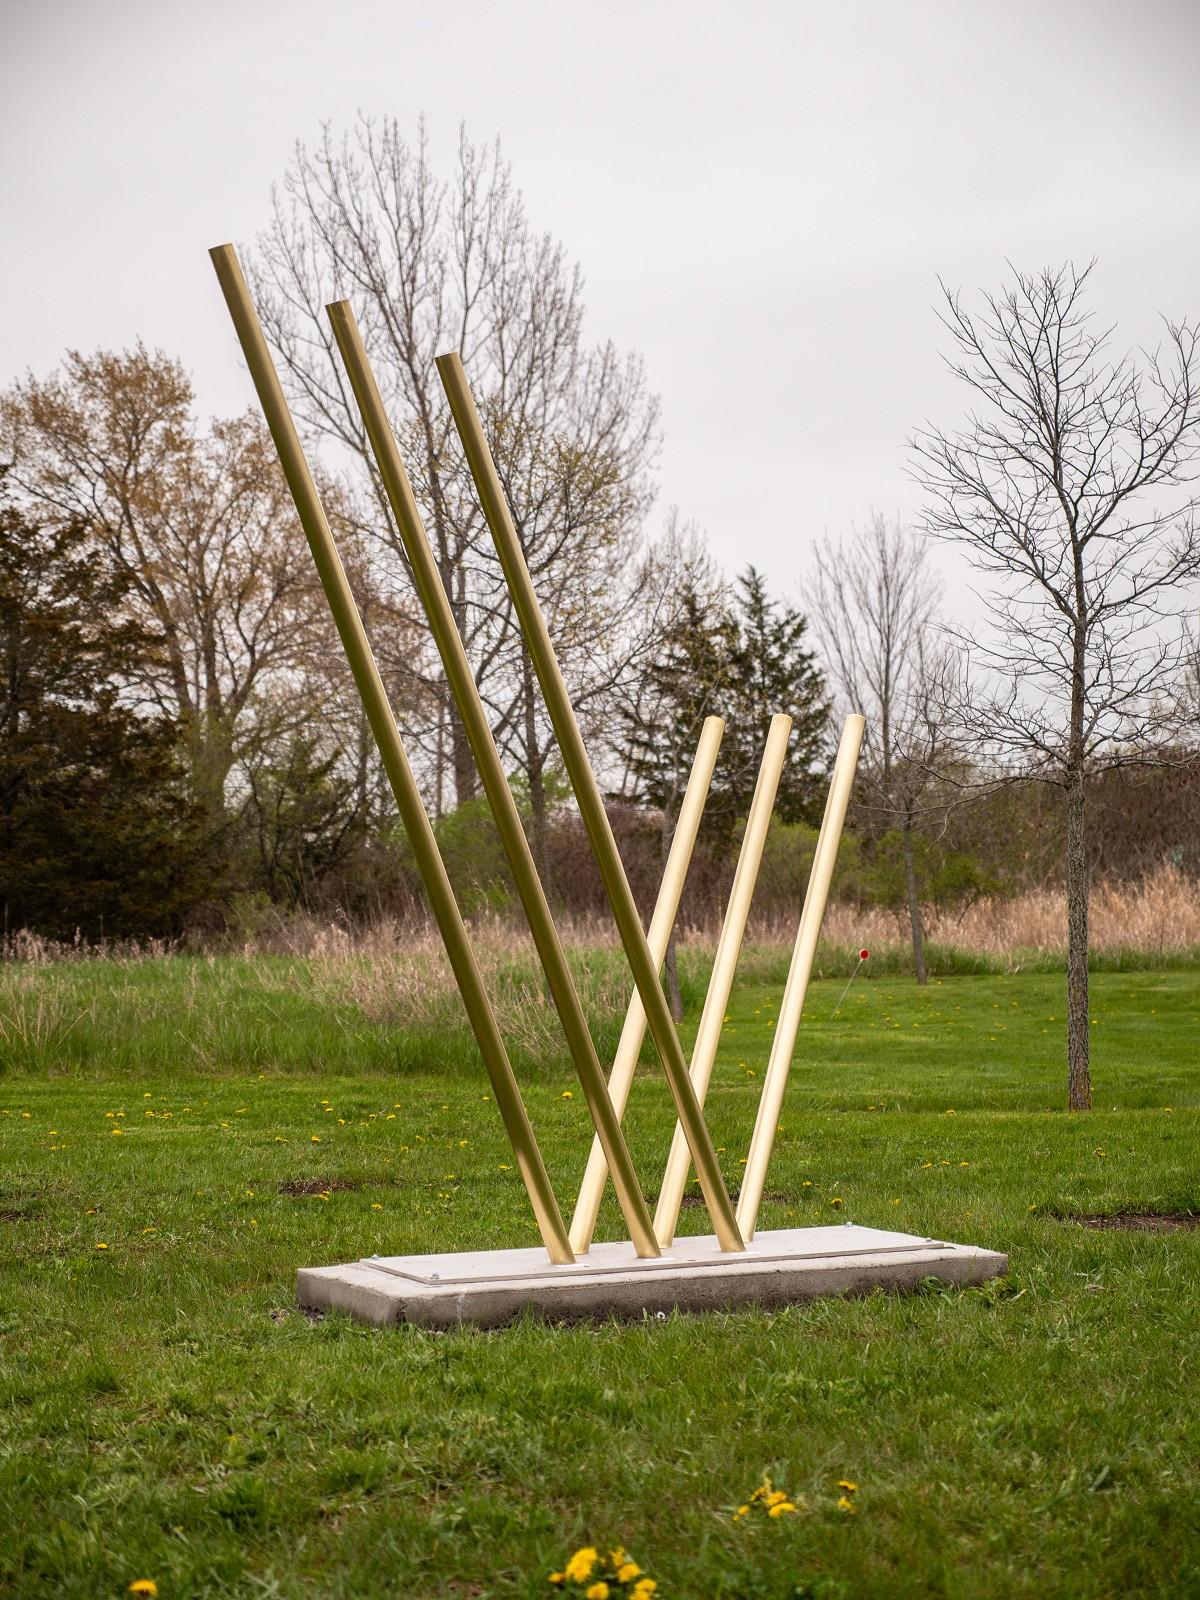 Solid steel rods coated in brilliant brass appear to rise out of the earth and reach for the sky in this dramatic sculpture by Canadian artist, Tonya Hart. 

Hart creates work that is inspired by forces of nature—light, energy and magnetism. 

“As a